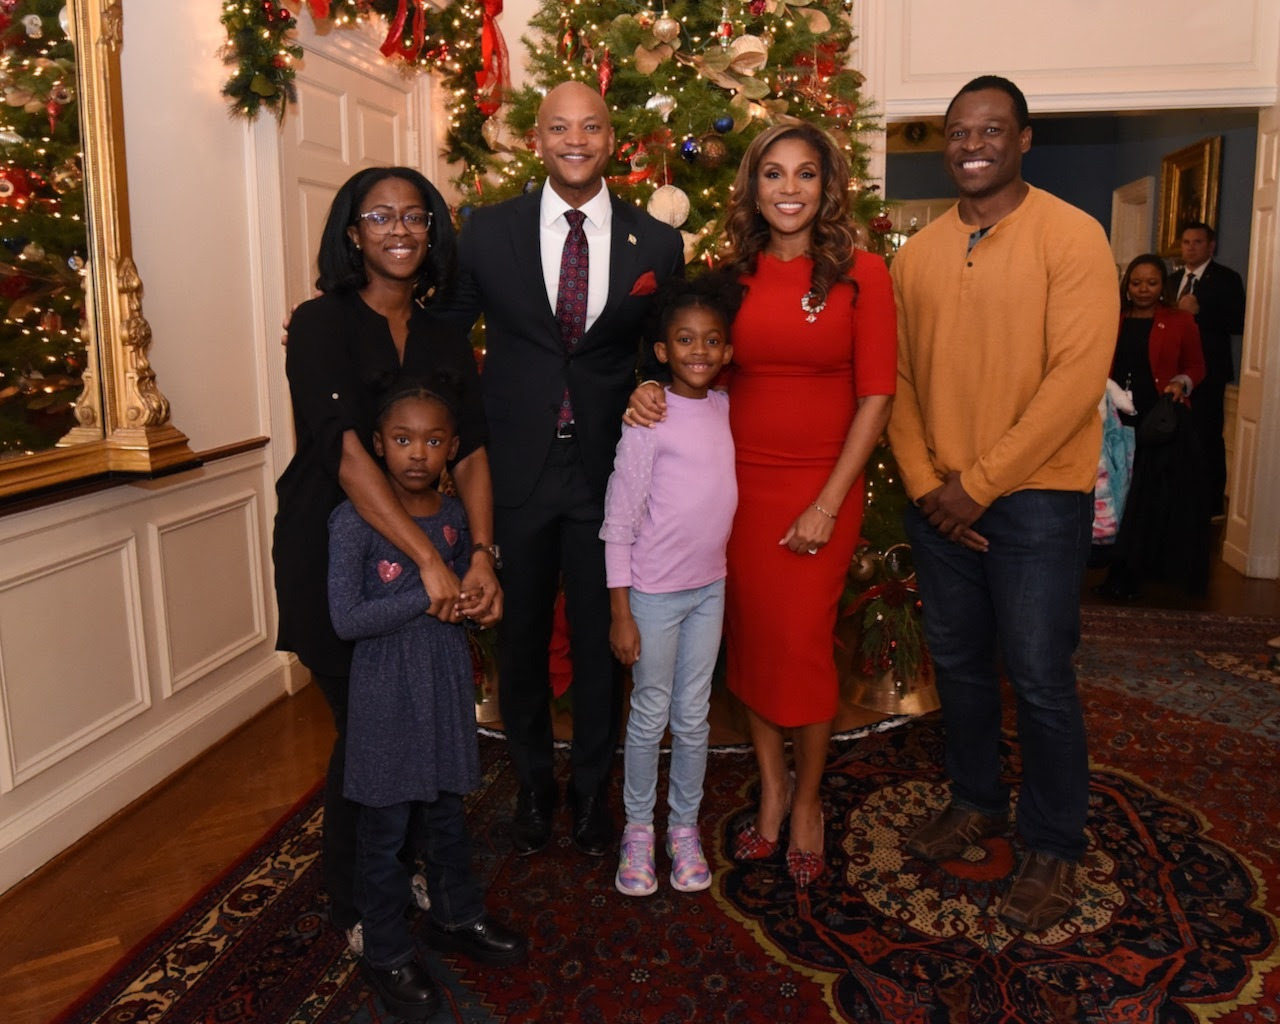 Governor and First Lady Moore celebrate the holidays with families at Government House.